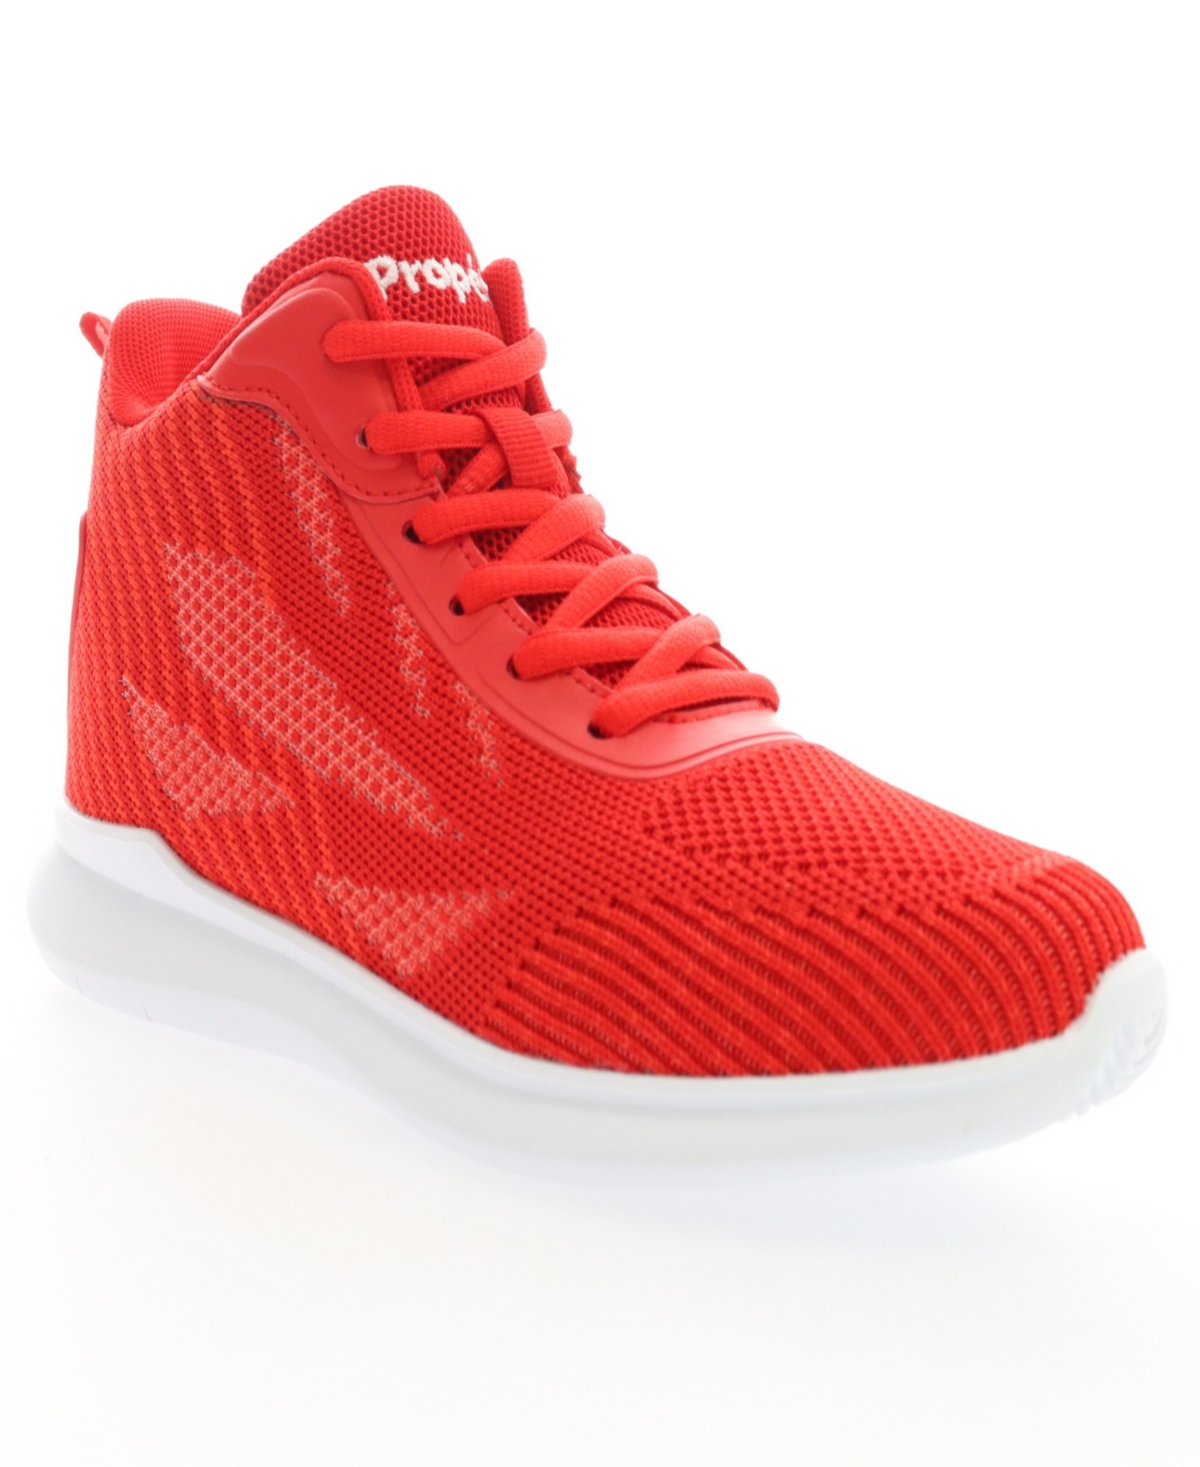 Women's TravelBound Hi Lace and Zip Sneakers - Red